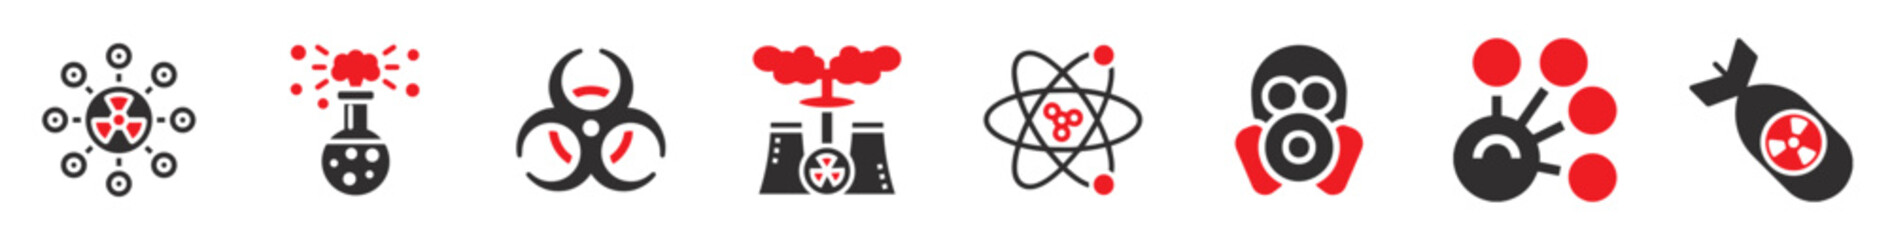 Radioactive, Nuclear power plant, Explosion, Atomic icon set vector. Flat style icons design.